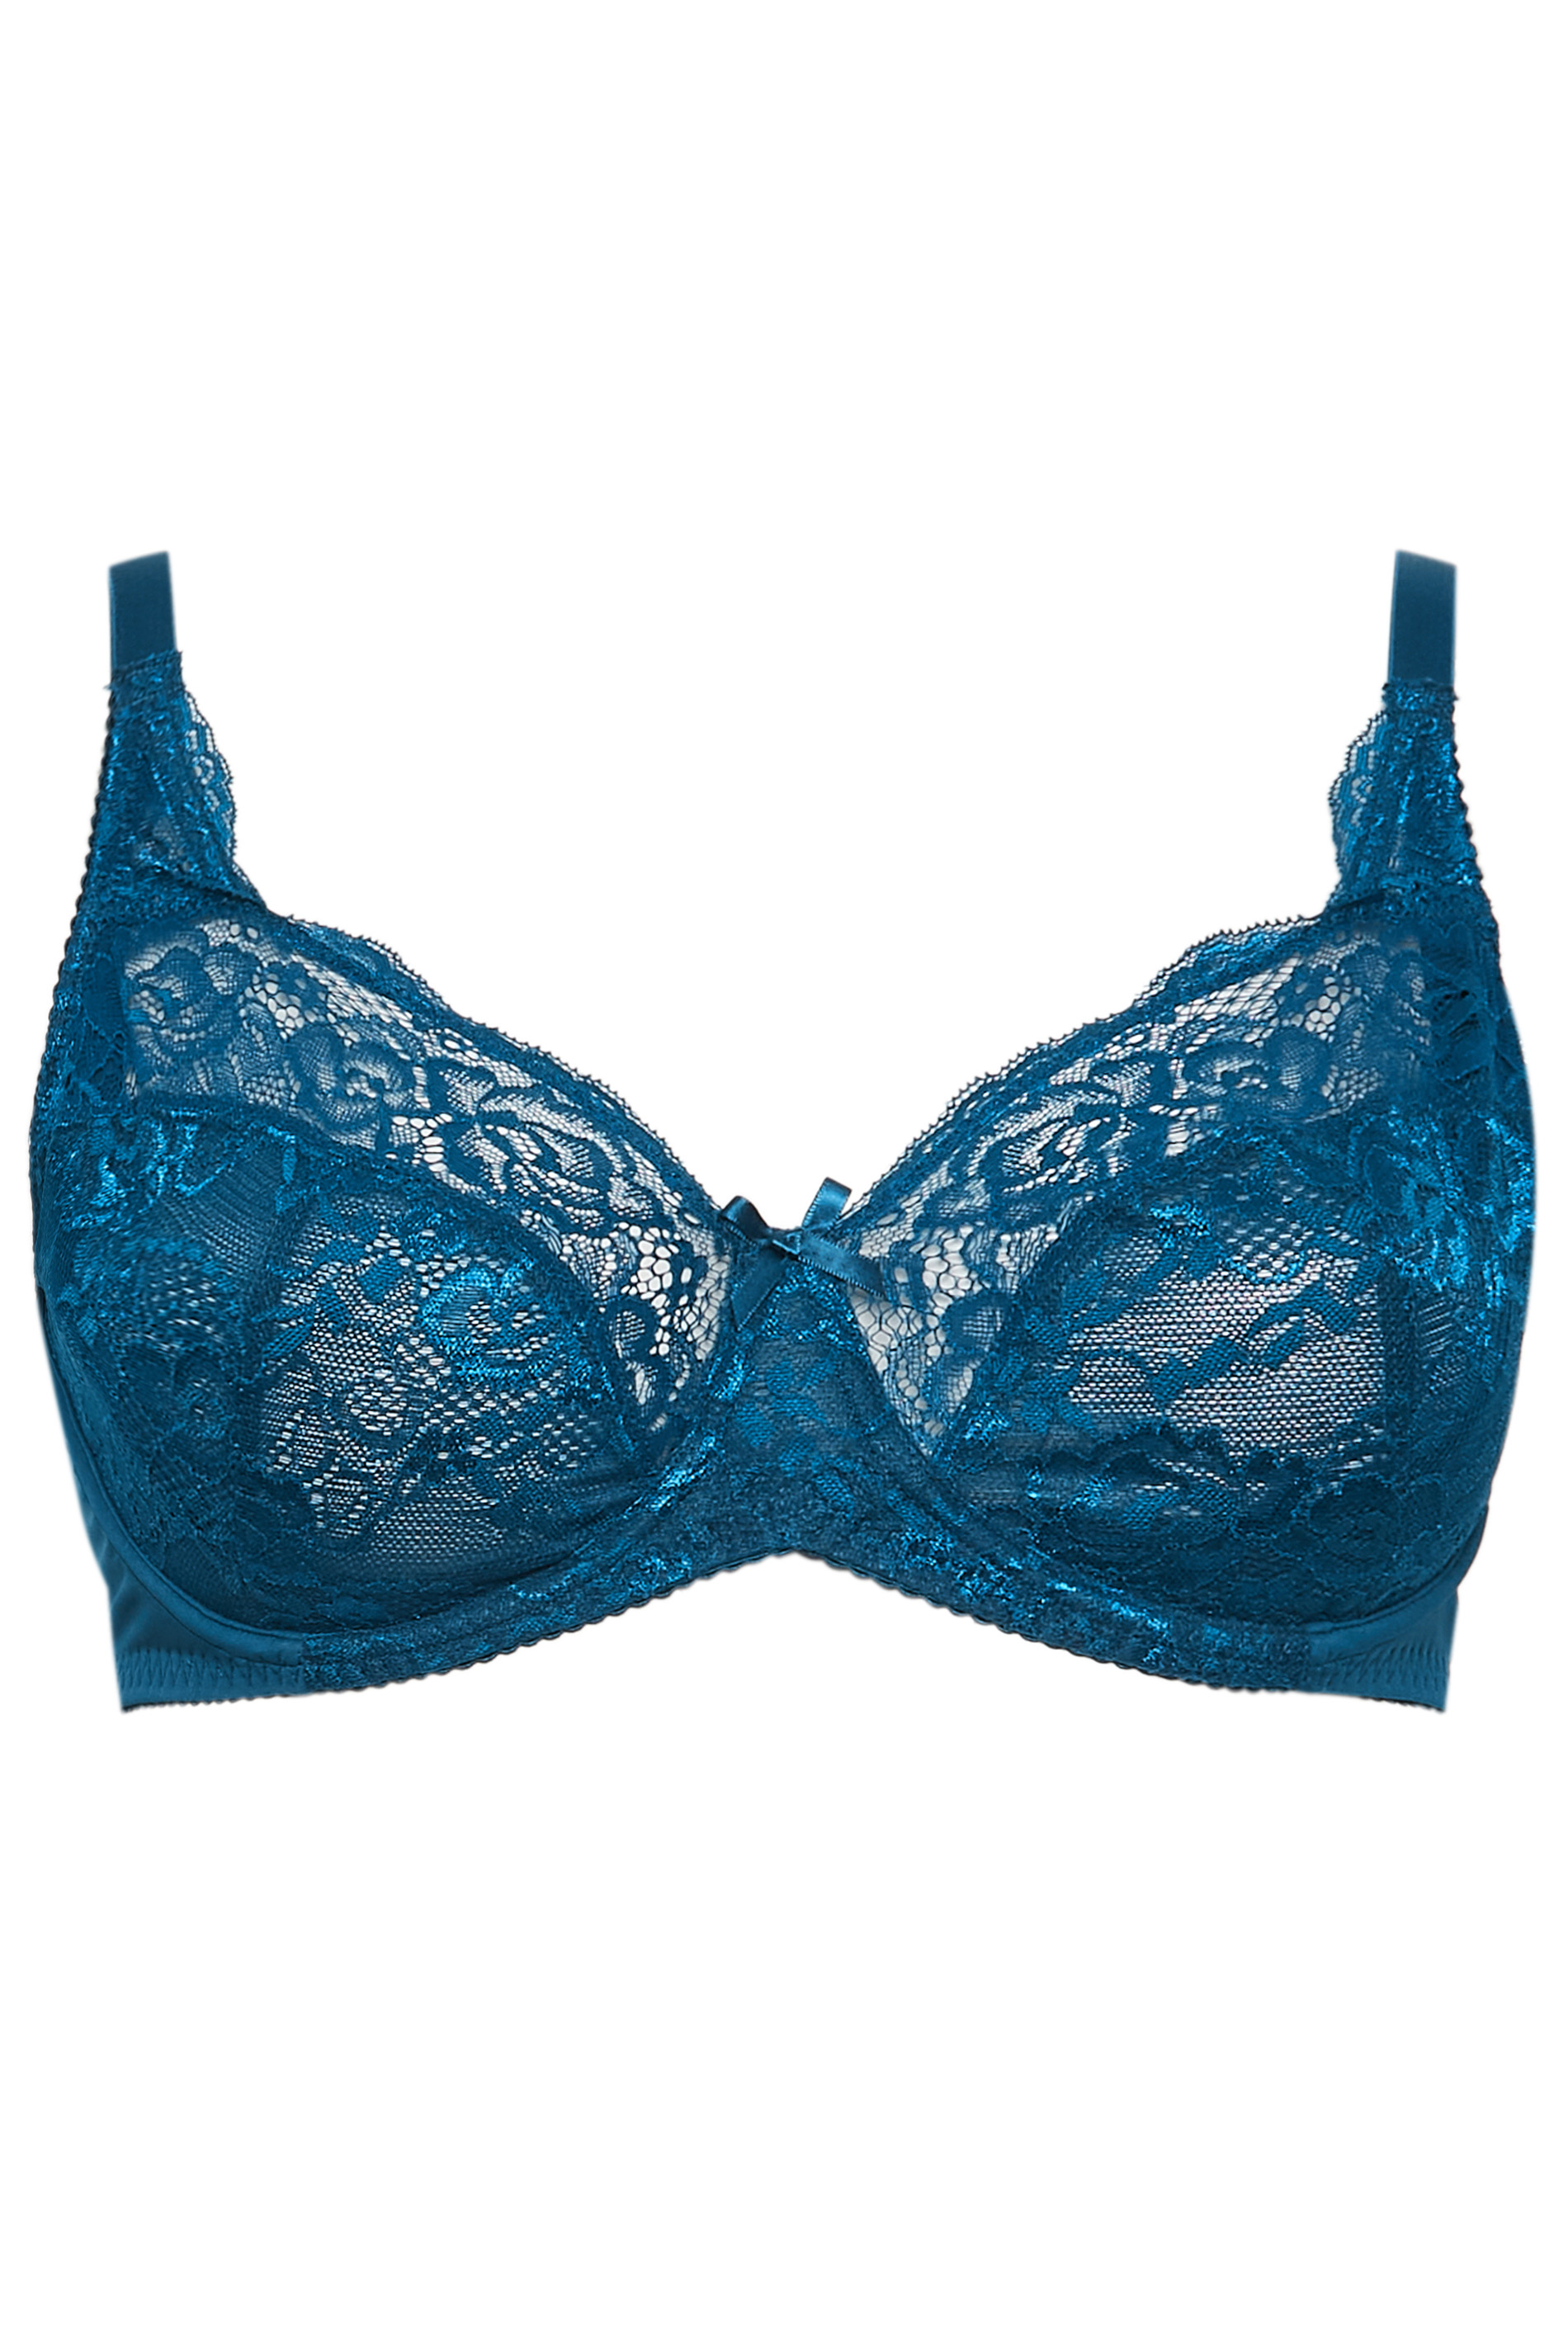 YOURS Curve Teal Green Stretch Lace Non-Padded Underwired Balcony Bra